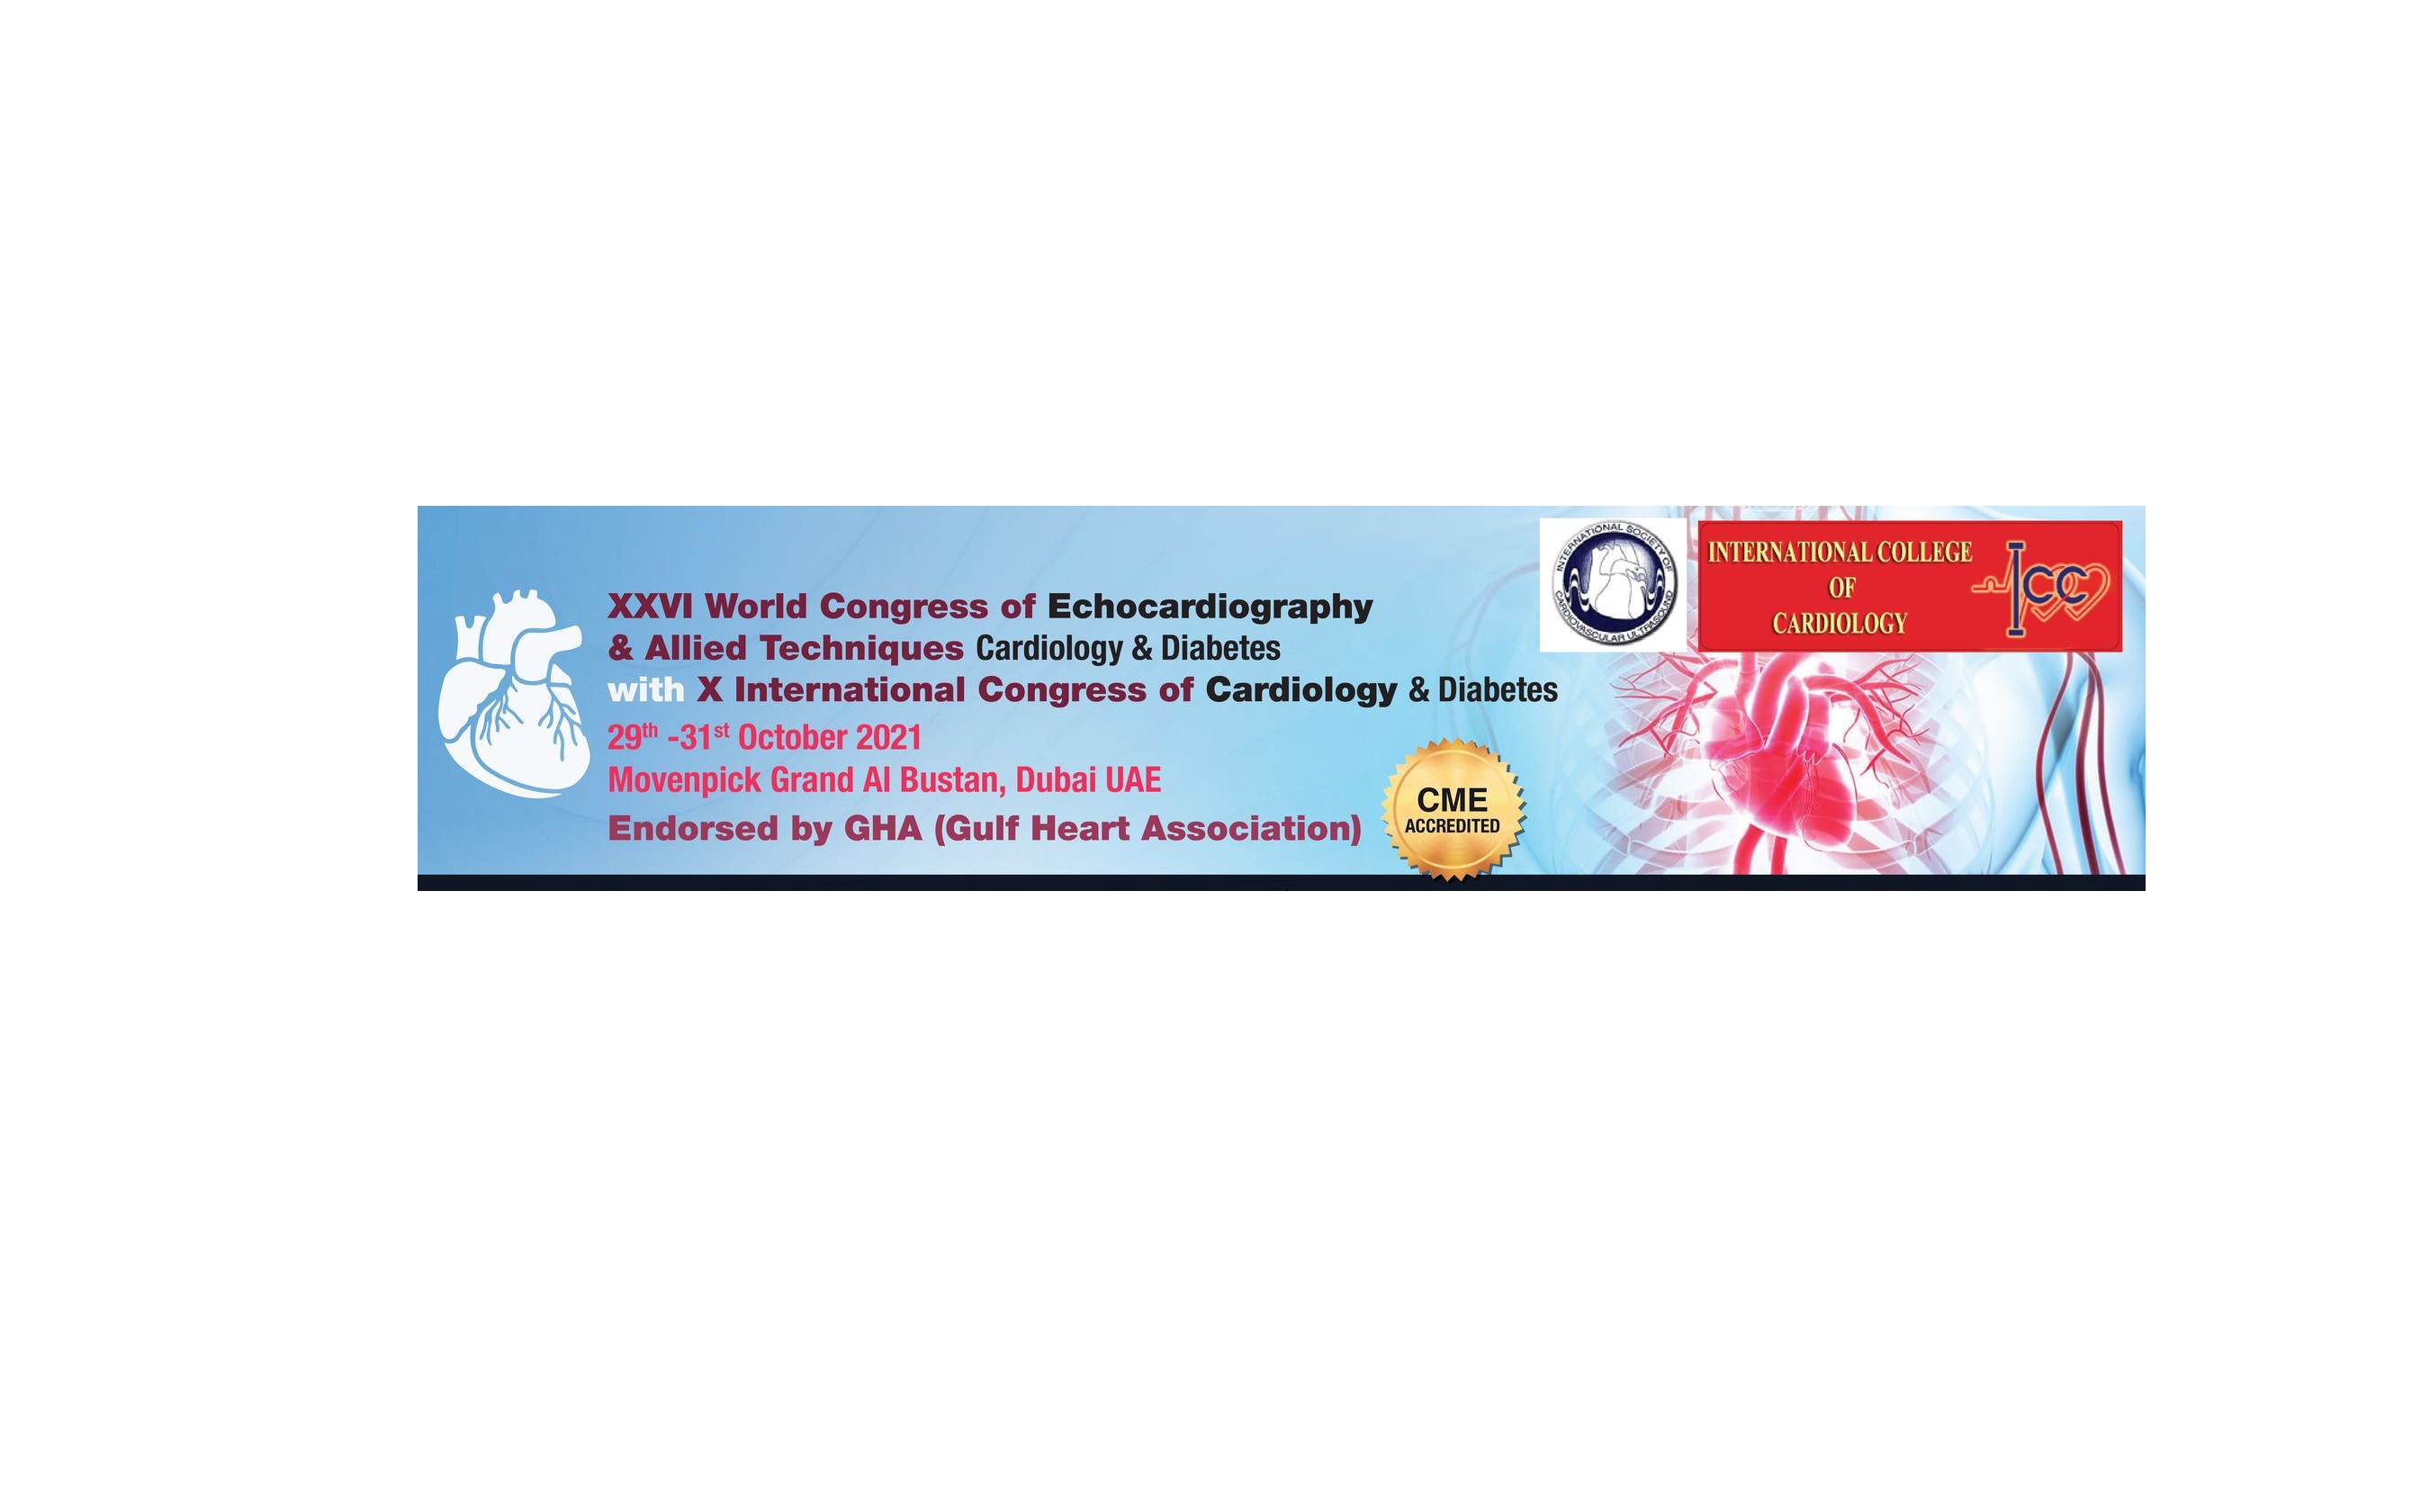 World Congress of Echocardiography & Allied Techniques Cardiology & Diabetes 2021